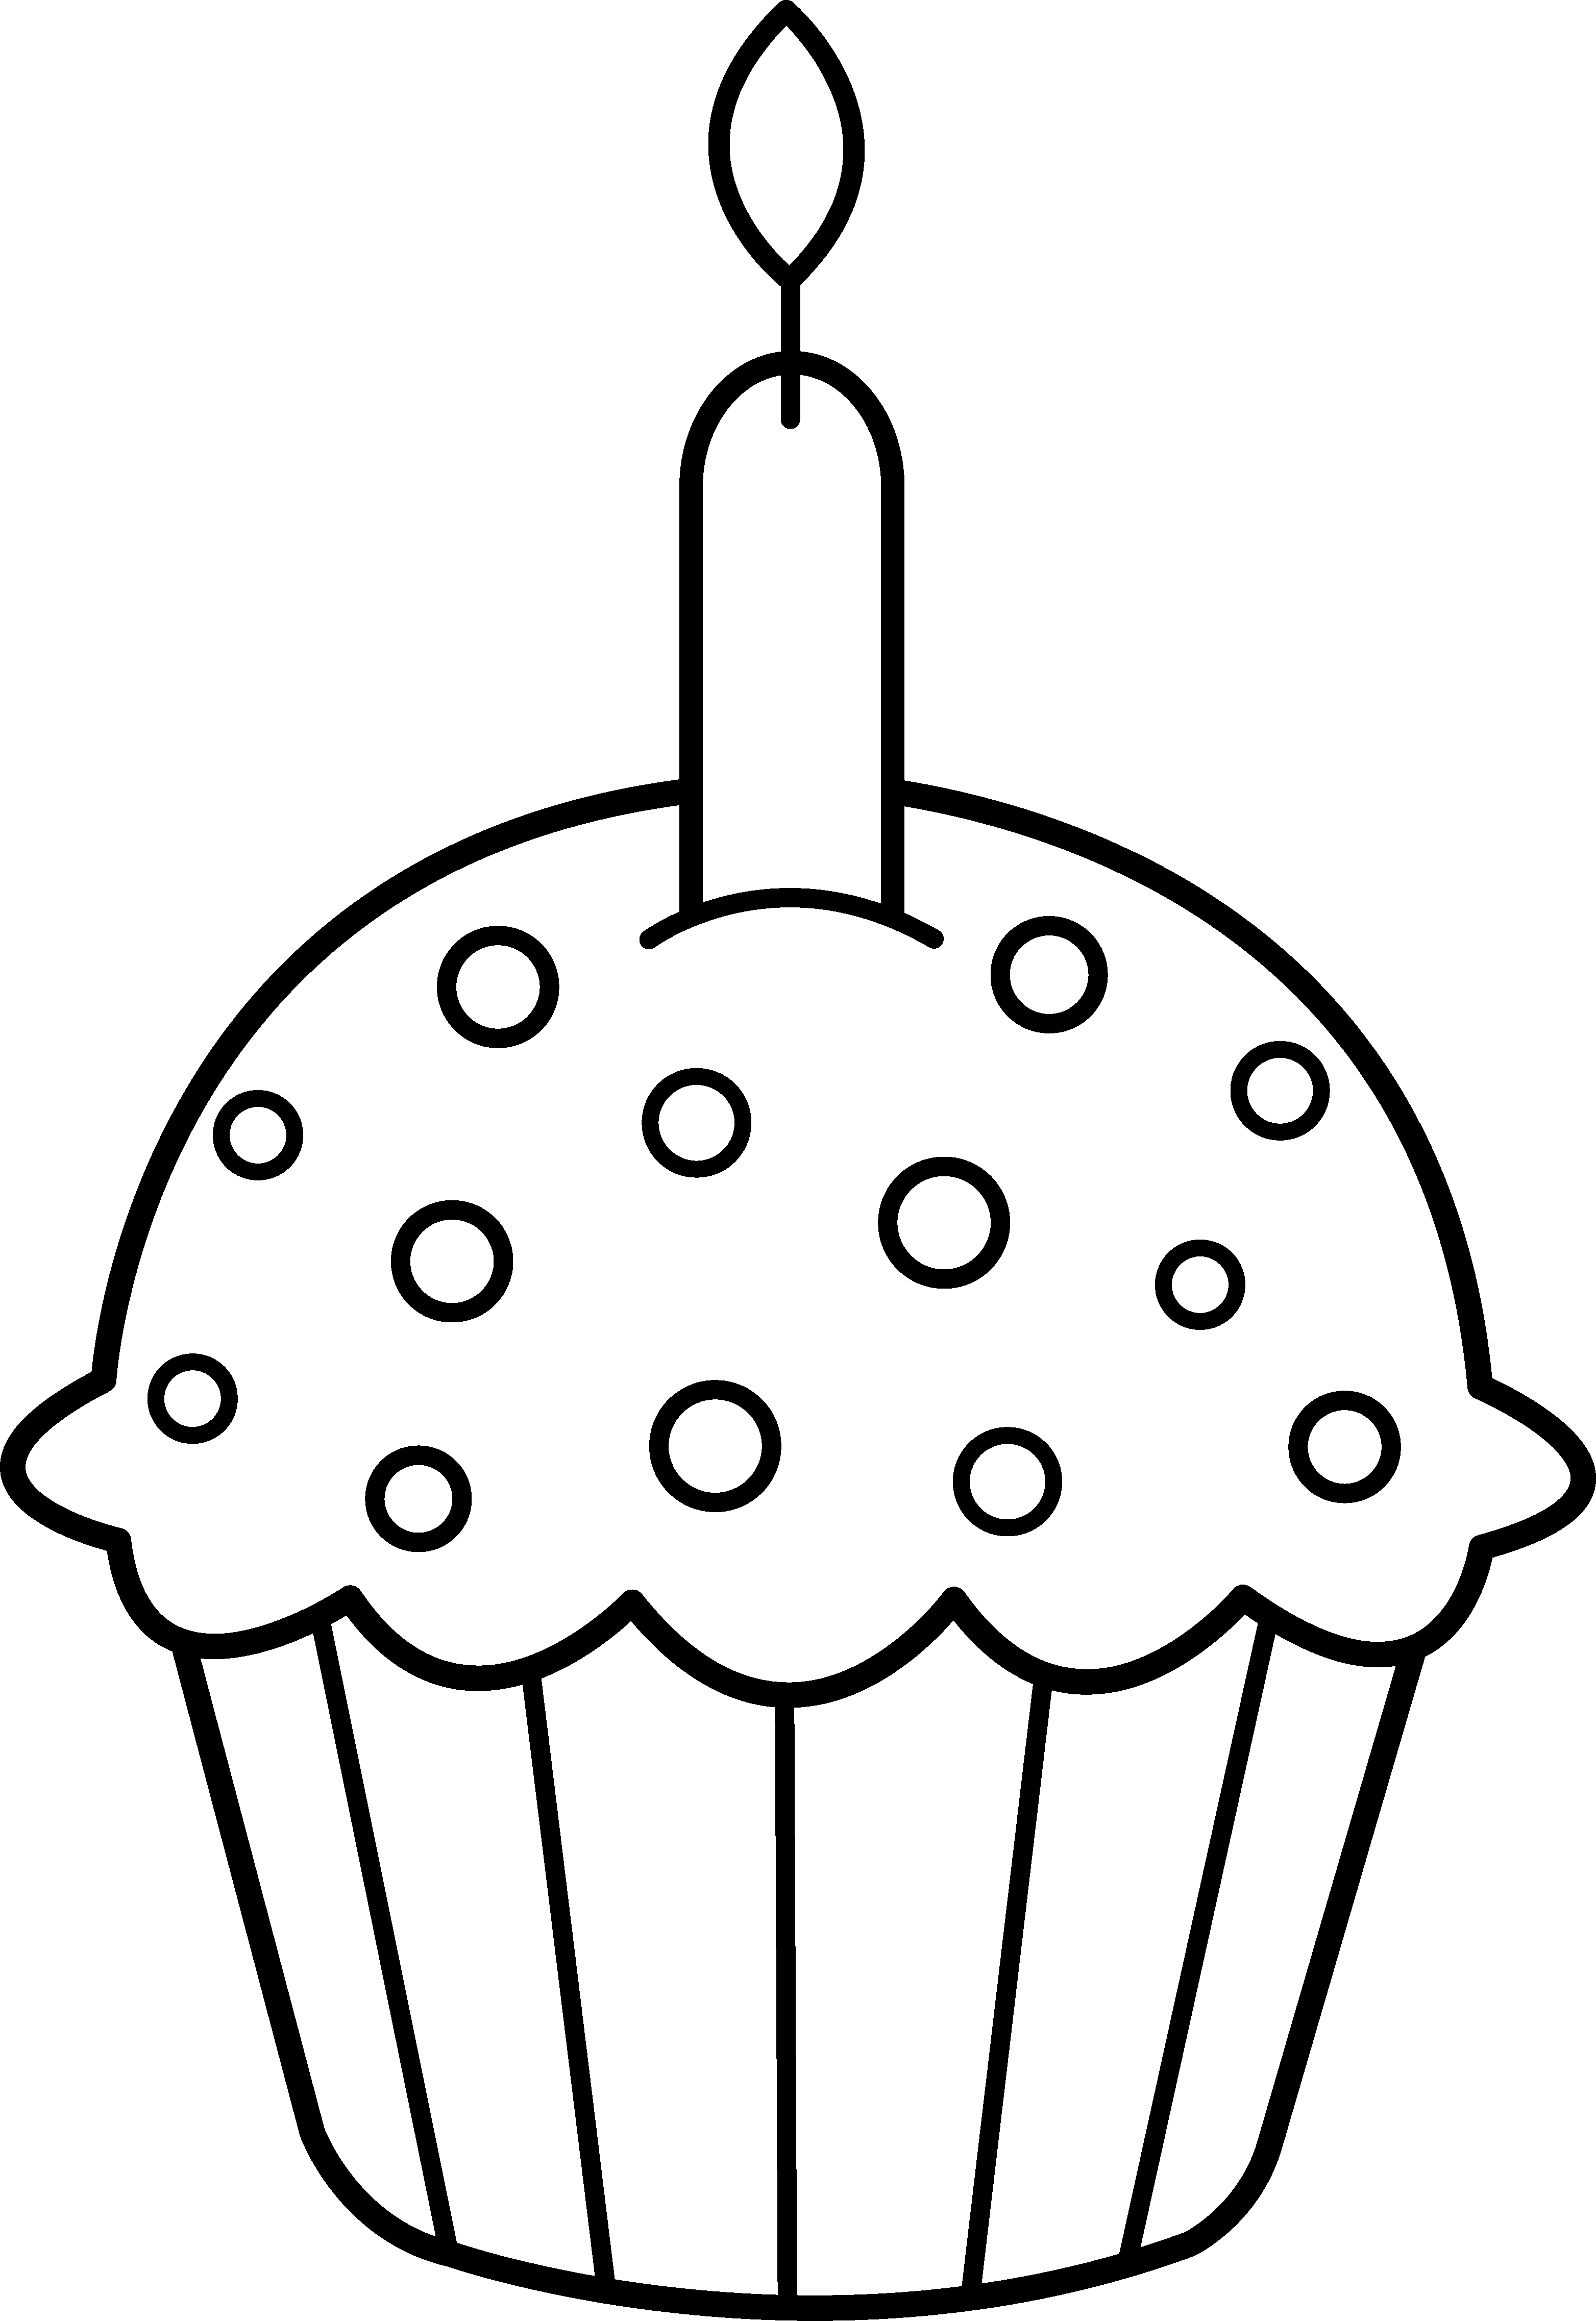 Birthday Cupcake Coloring Page - Free Clip Art